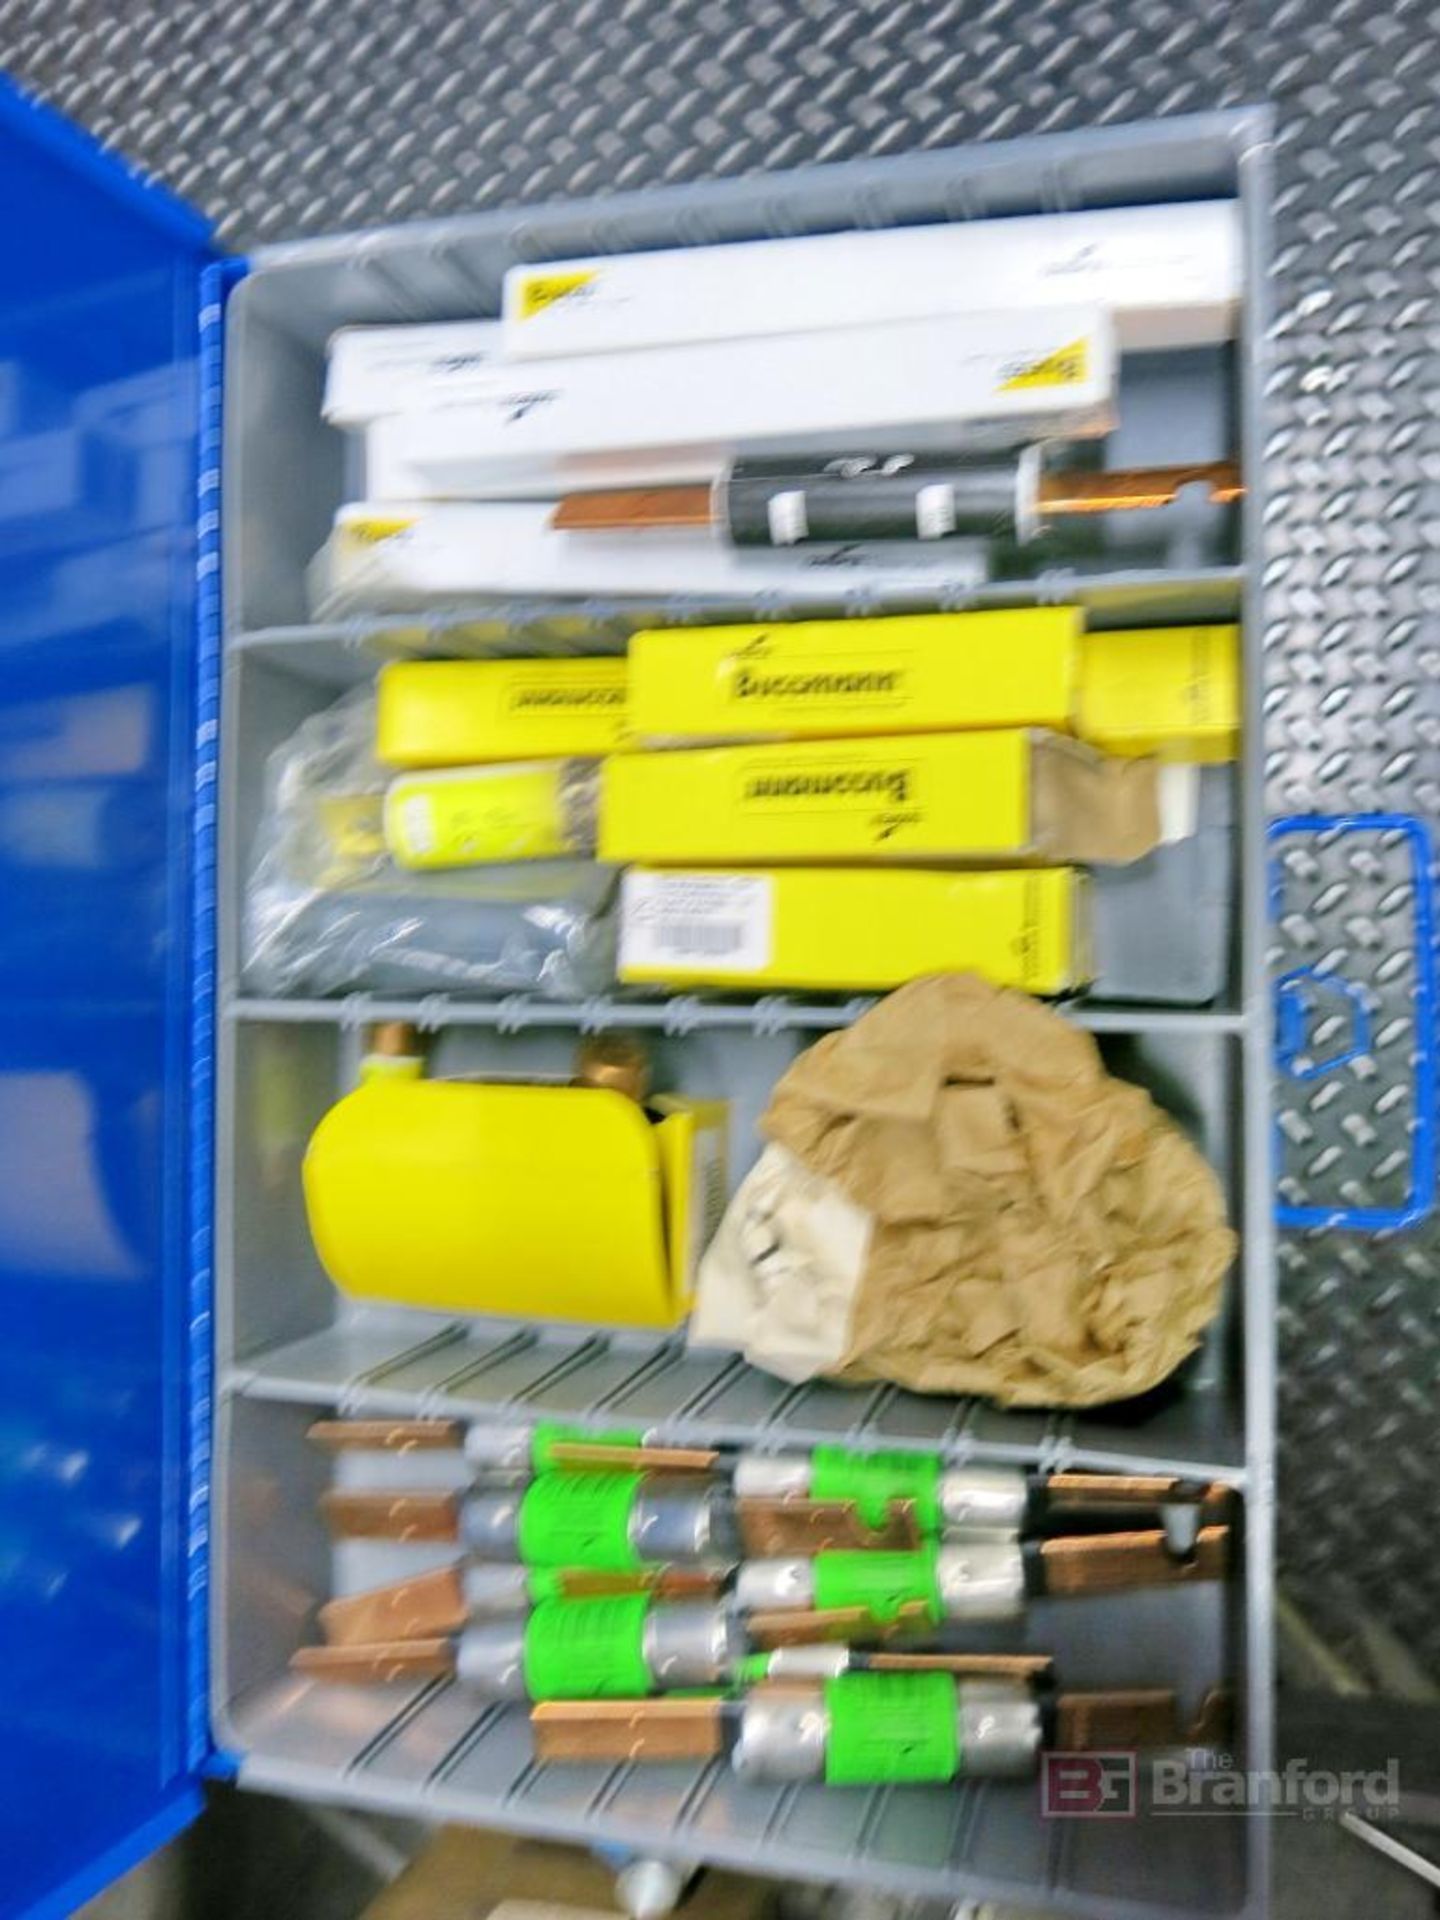 (2) Fastenal Multidrawer Small Parts Bins w/ Contents - Image 3 of 6